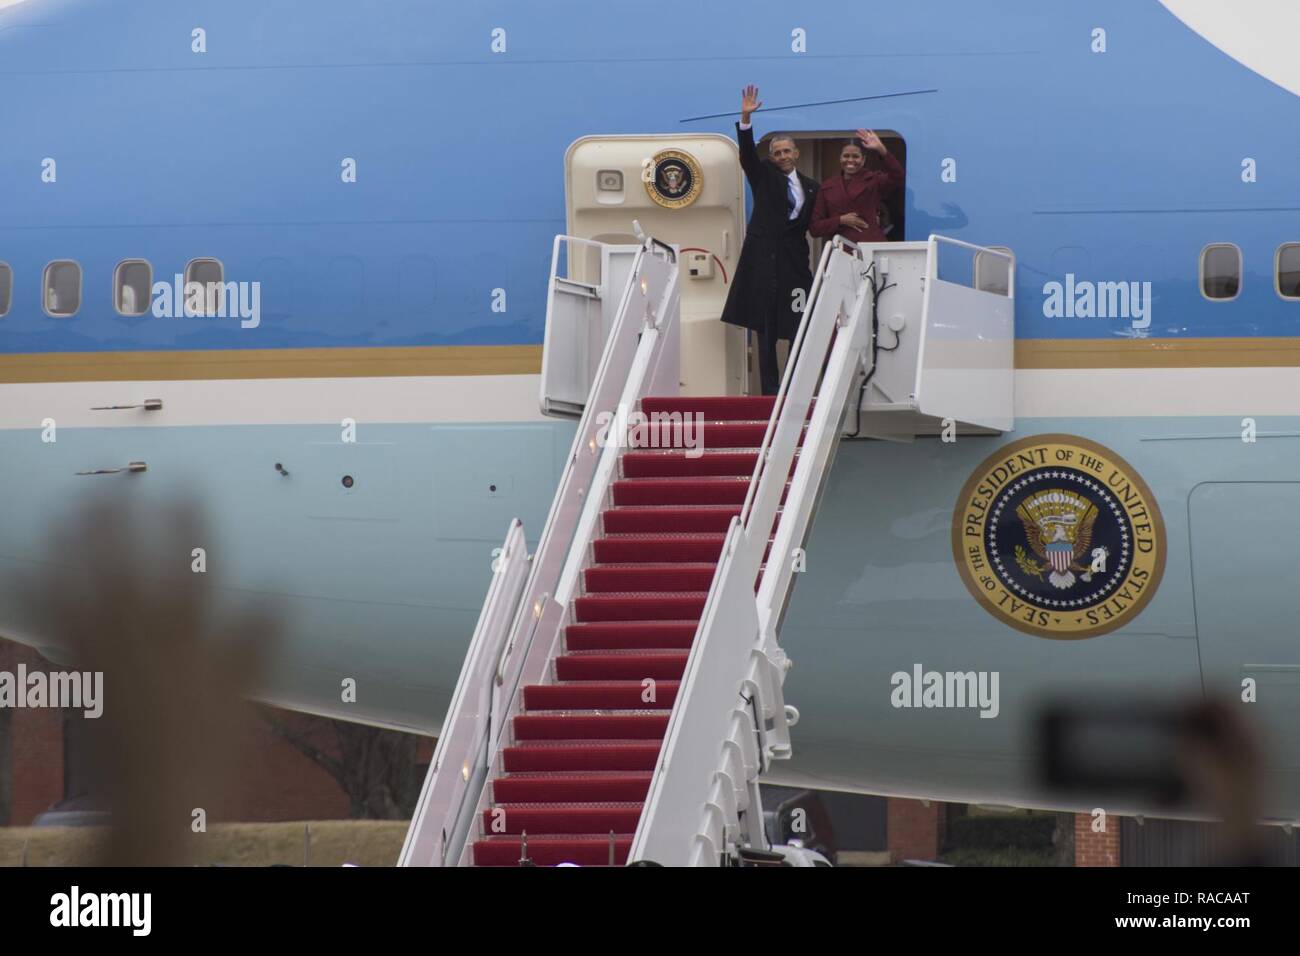 Former President Barack Obama and his wife Michelle wave goodbye after his farewell speech on Joint Base Andrews, Md., Jan. 20, 2017. Throughout his eight-year tenure as president, Obama traveled to and from JBA aboard Air Force One more than 600 times, traveling around the world. Stock Photo